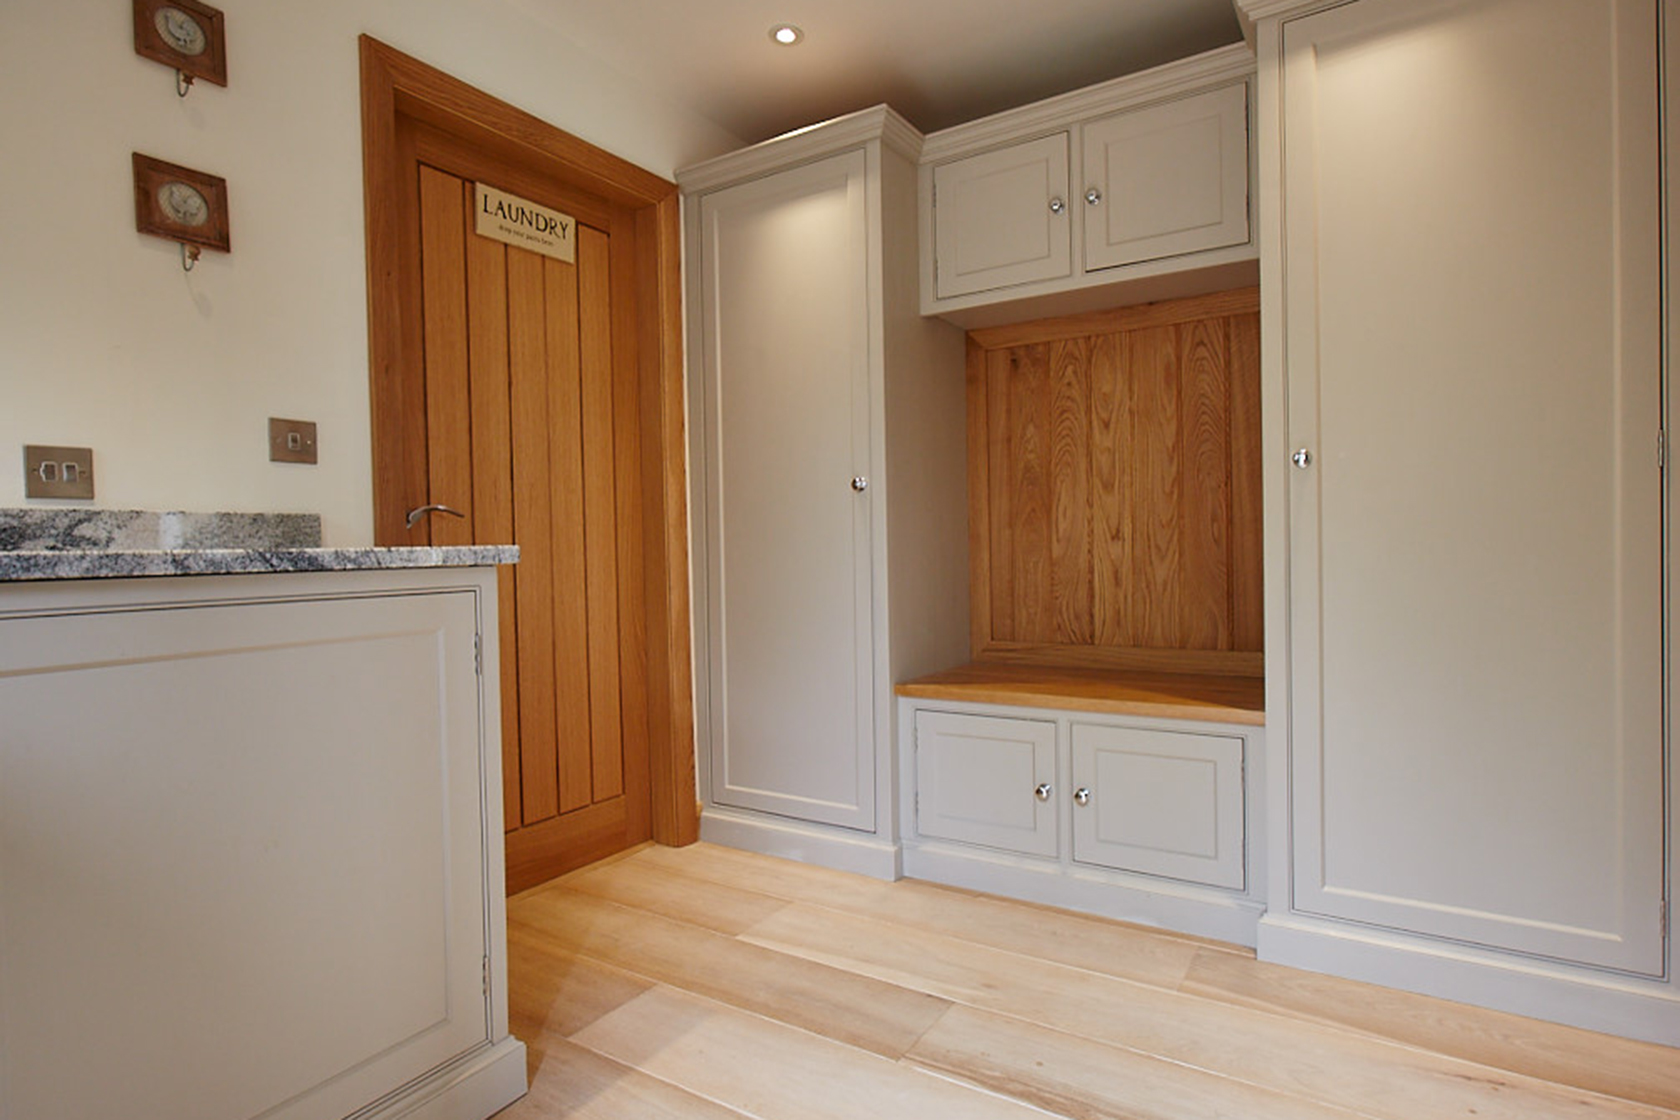 Laundry room with fitted units and seating area made from solid oak